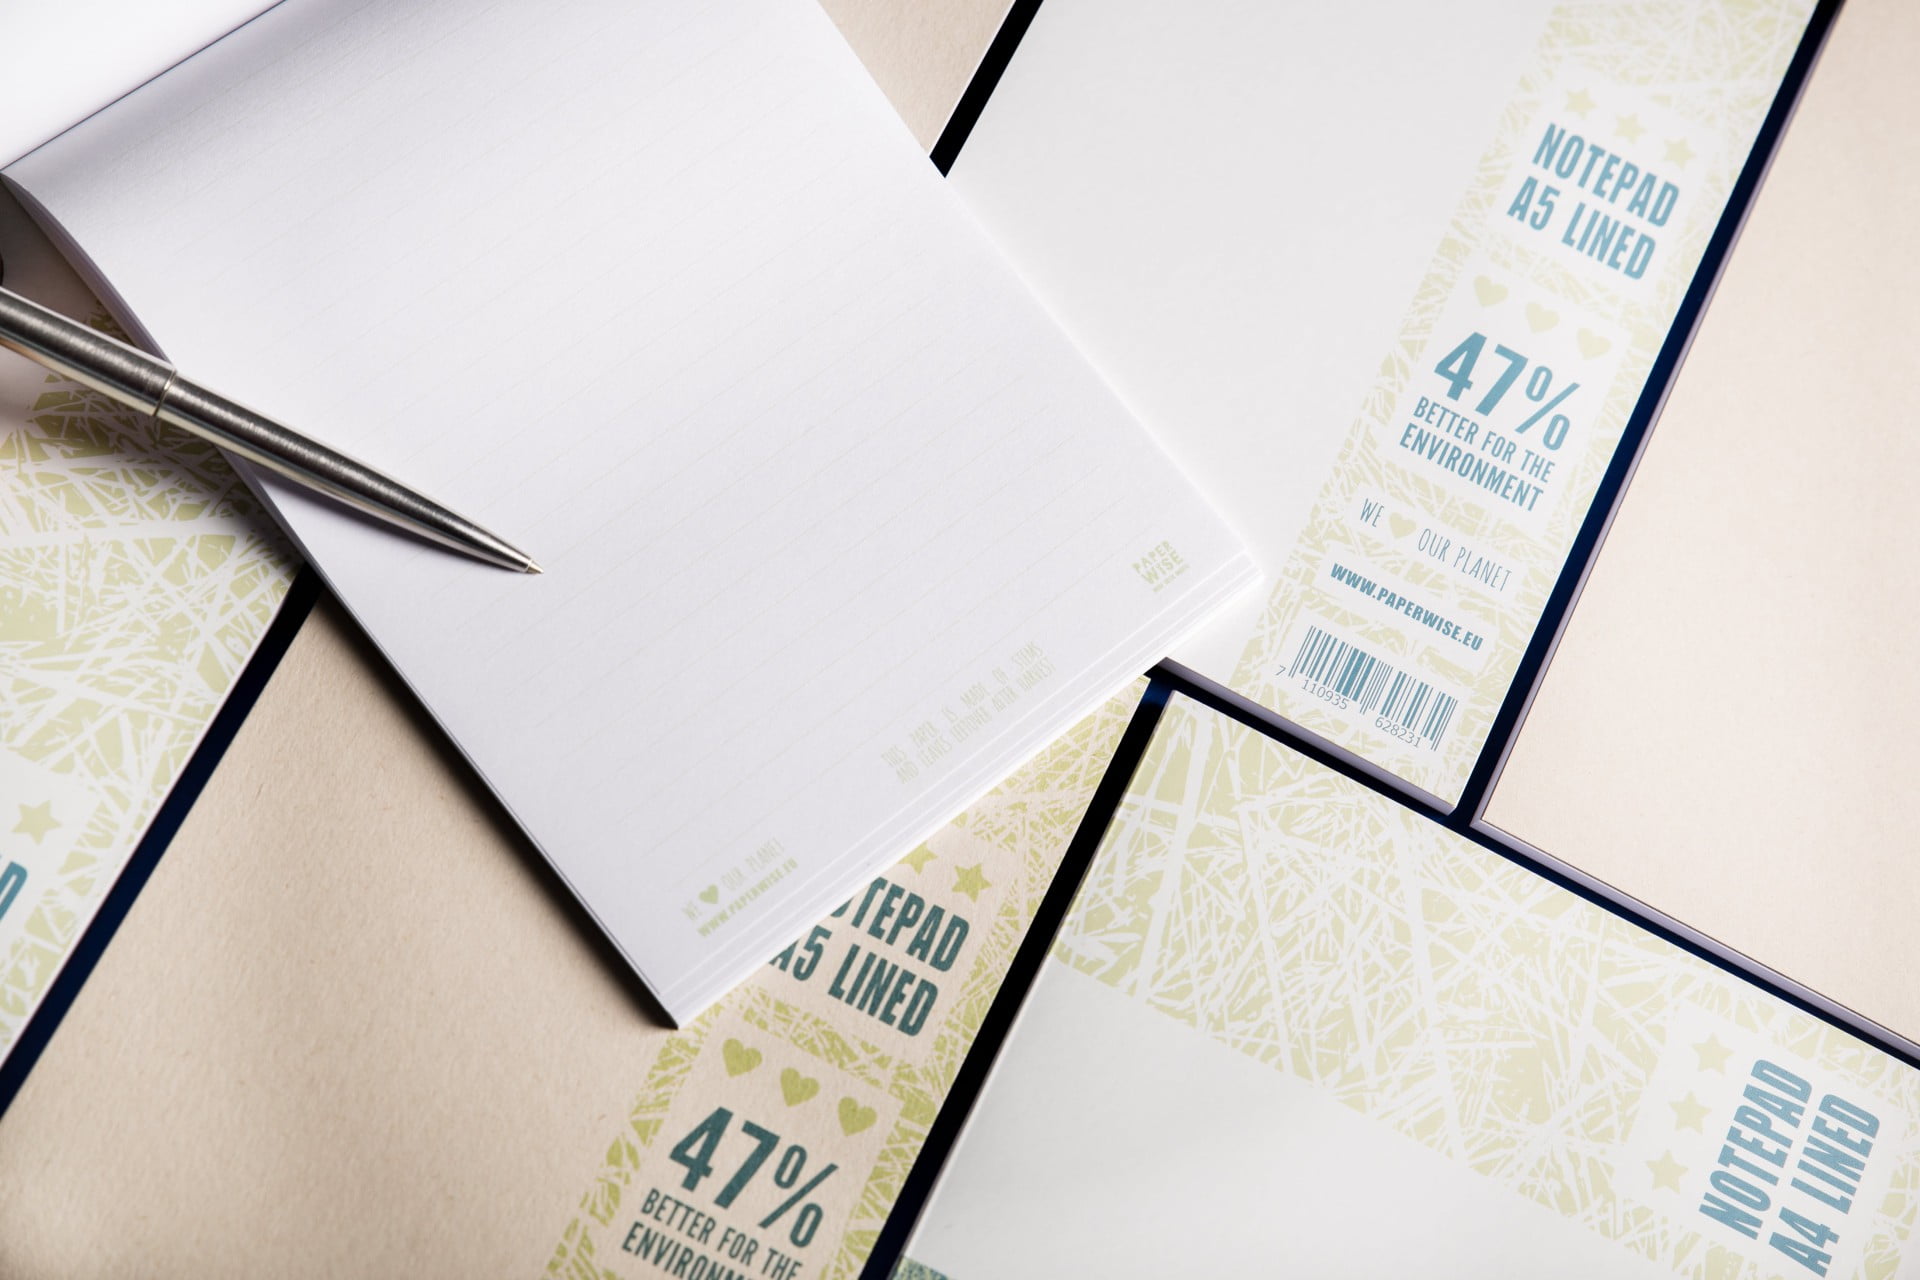 PaperWise-sustainable-paper-notebooks-white-notes-eco-stationery organic writing pad office